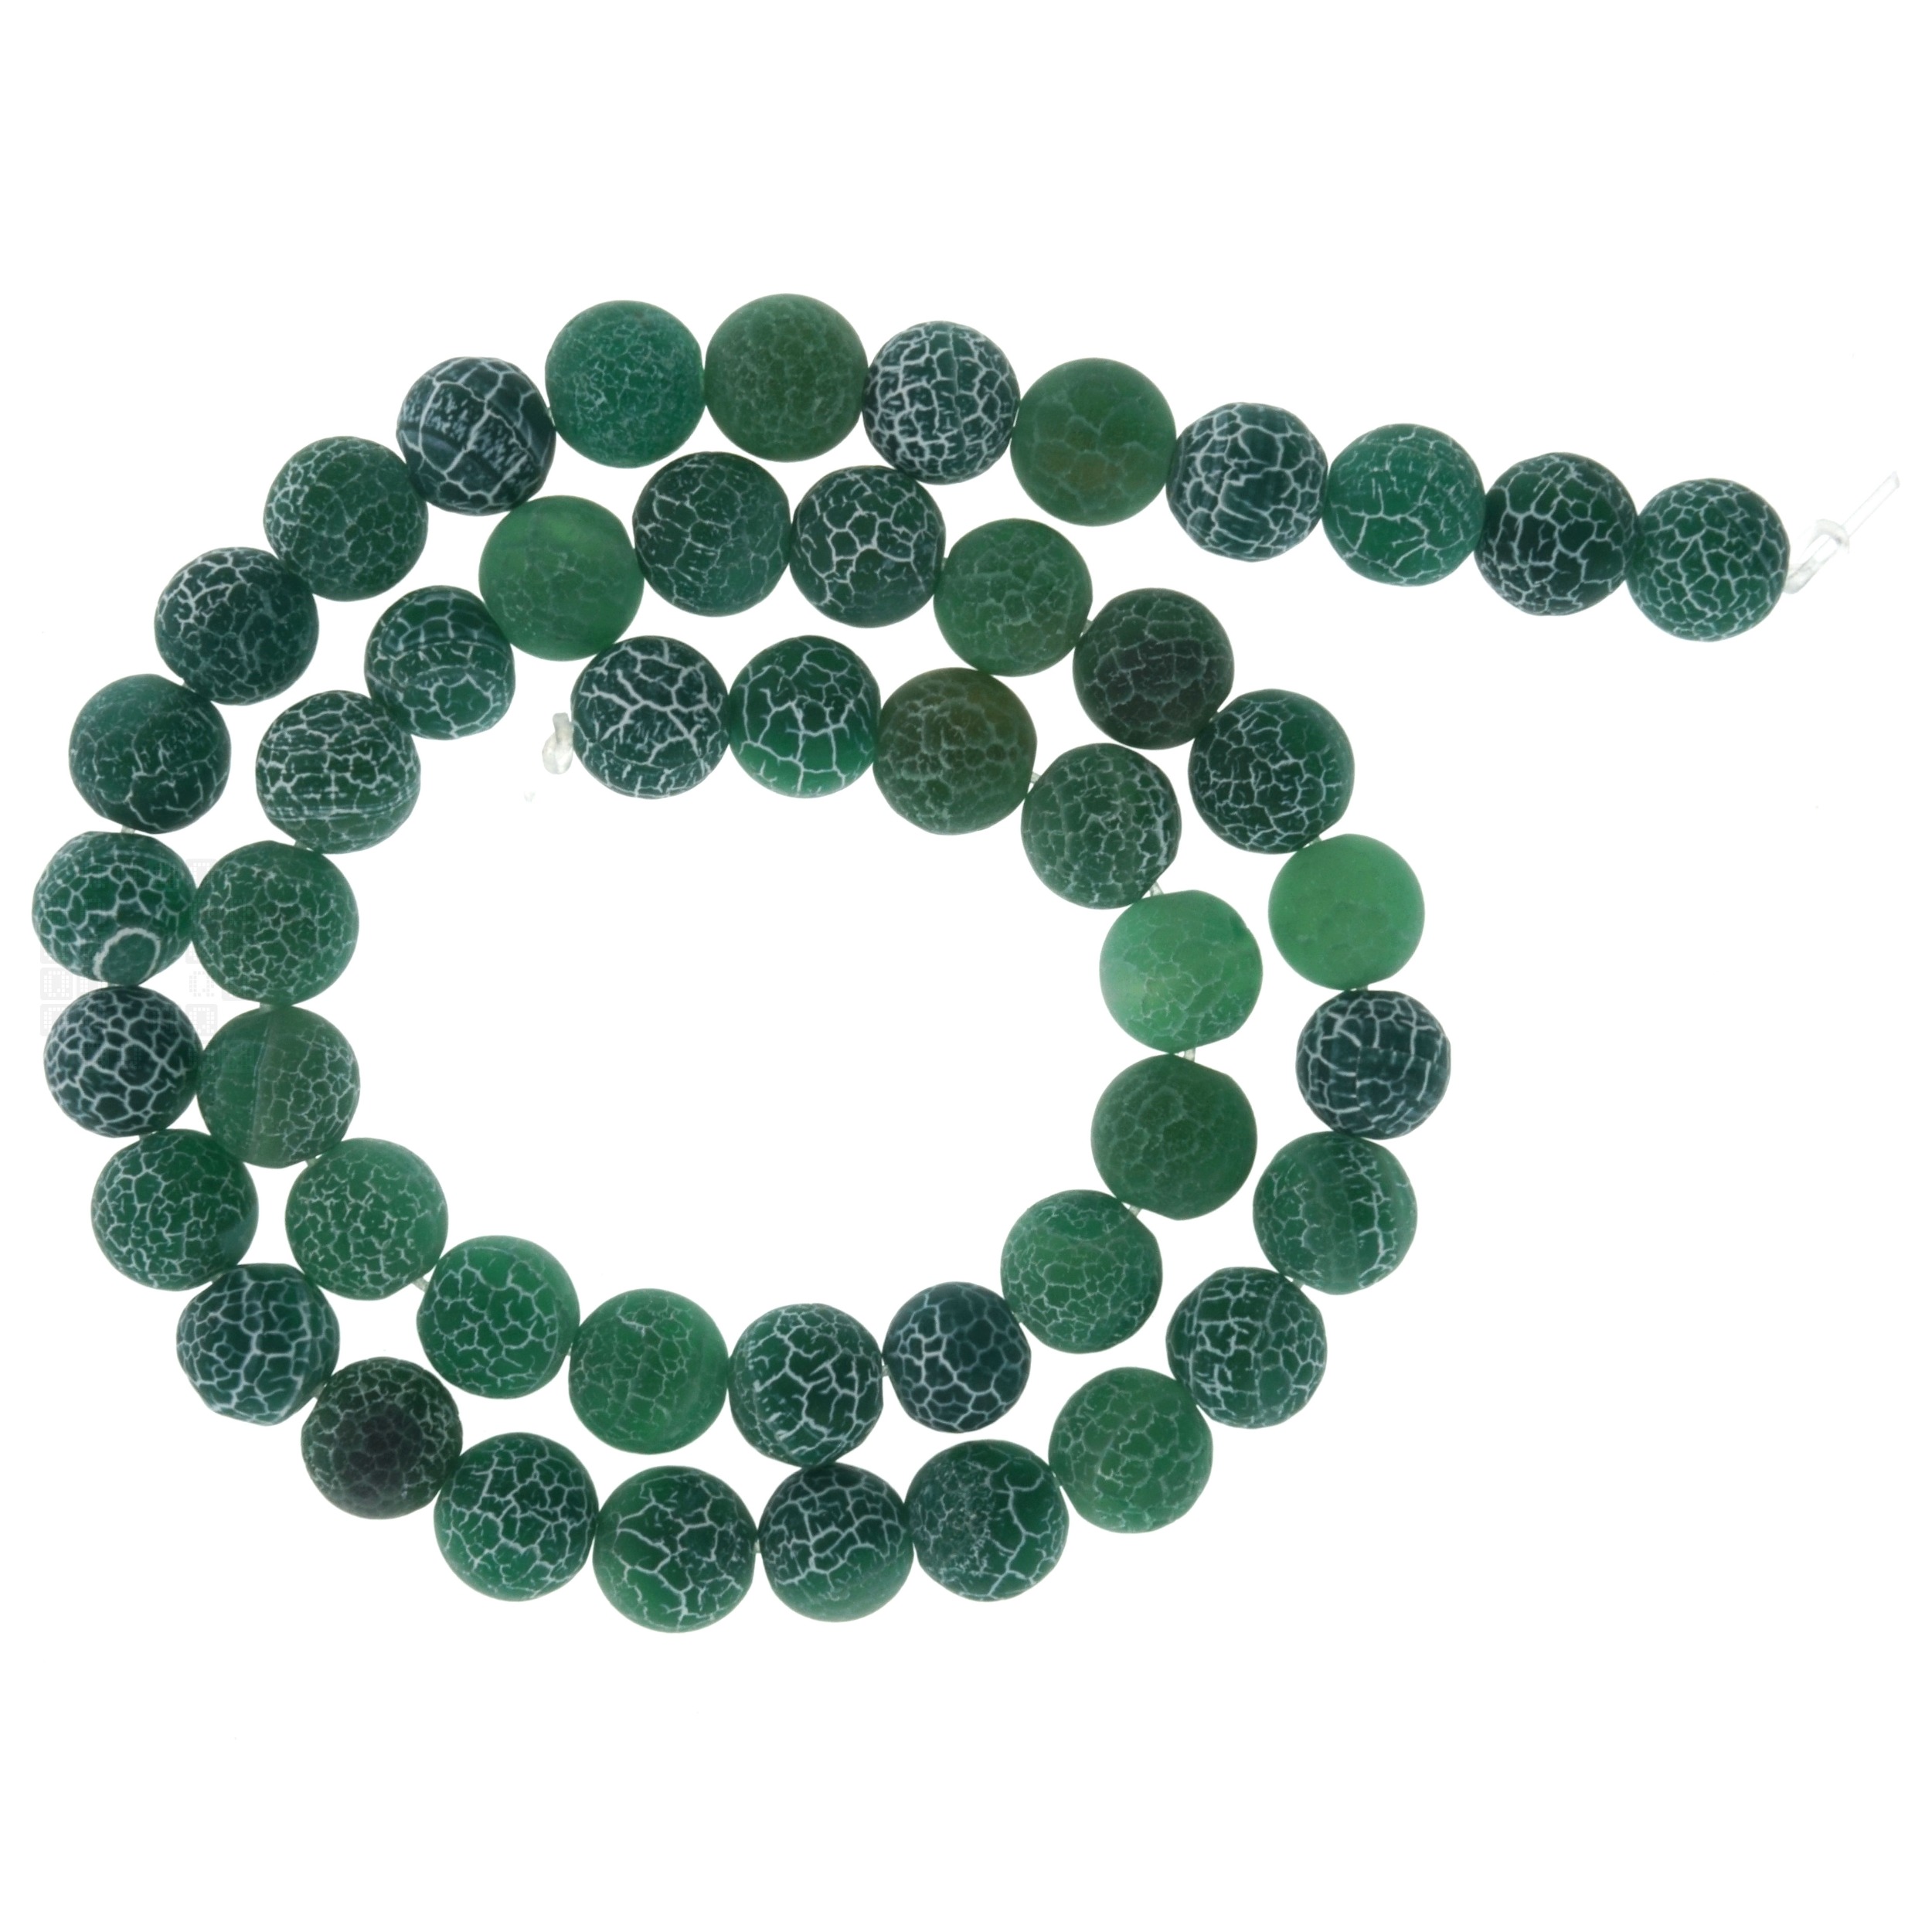 Green Frost Cracked Agate 8mm Round Glass Beads, 45 Pieces